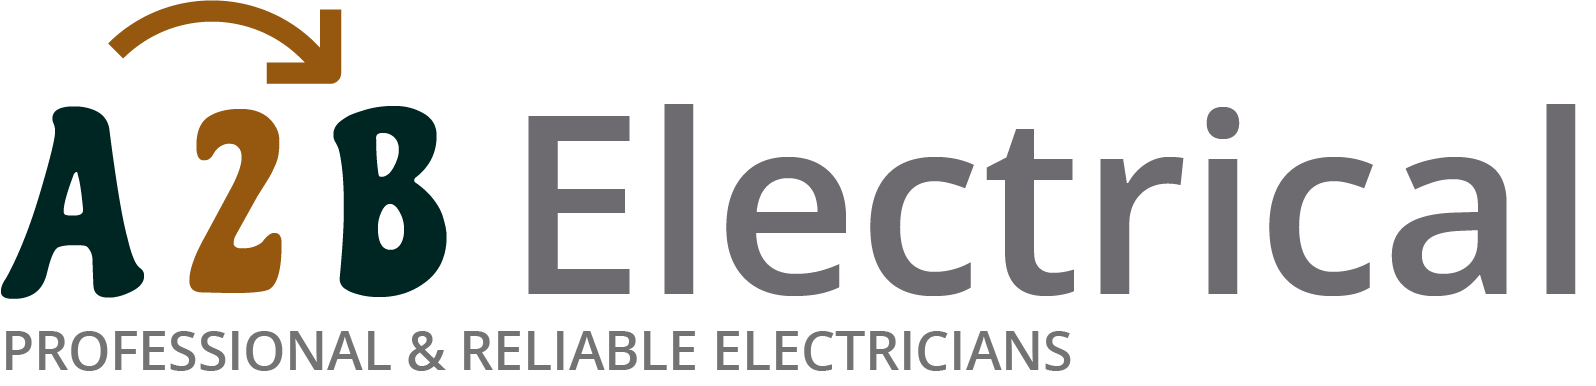 If you have electrical wiring problems in Kidlington, we can provide an electrician to have a look for you. 